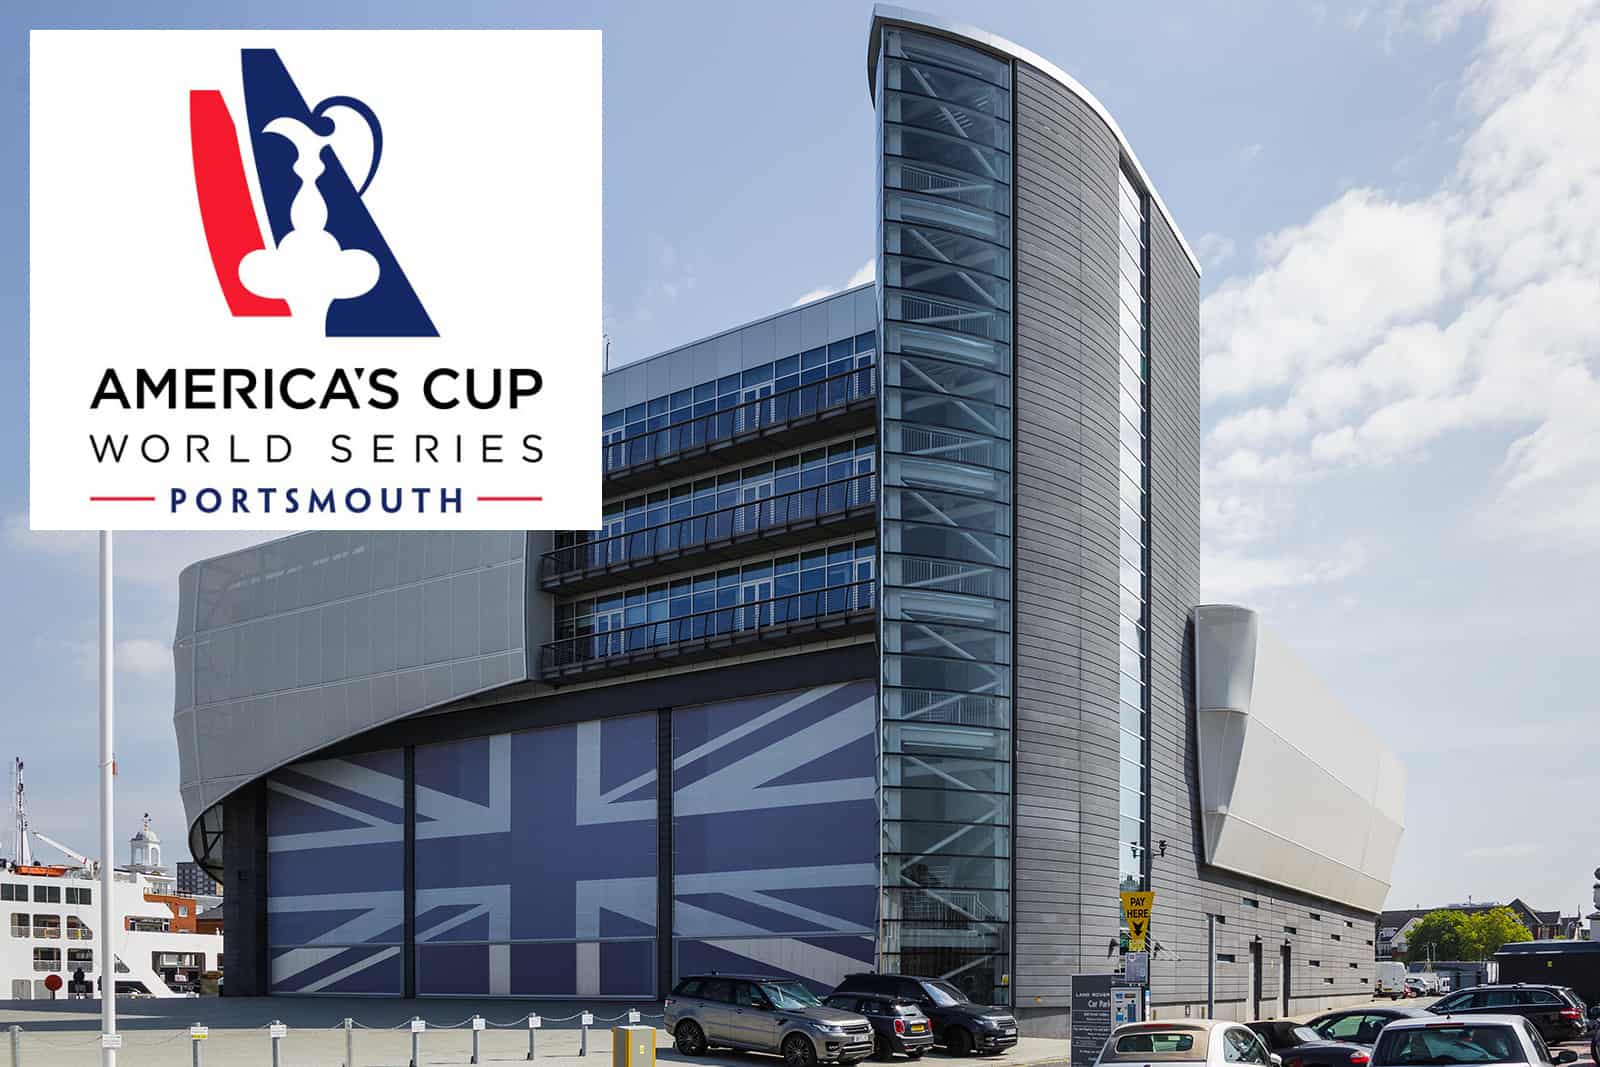 America's cup world series 2015 HQ in Southsea, Portsmouth